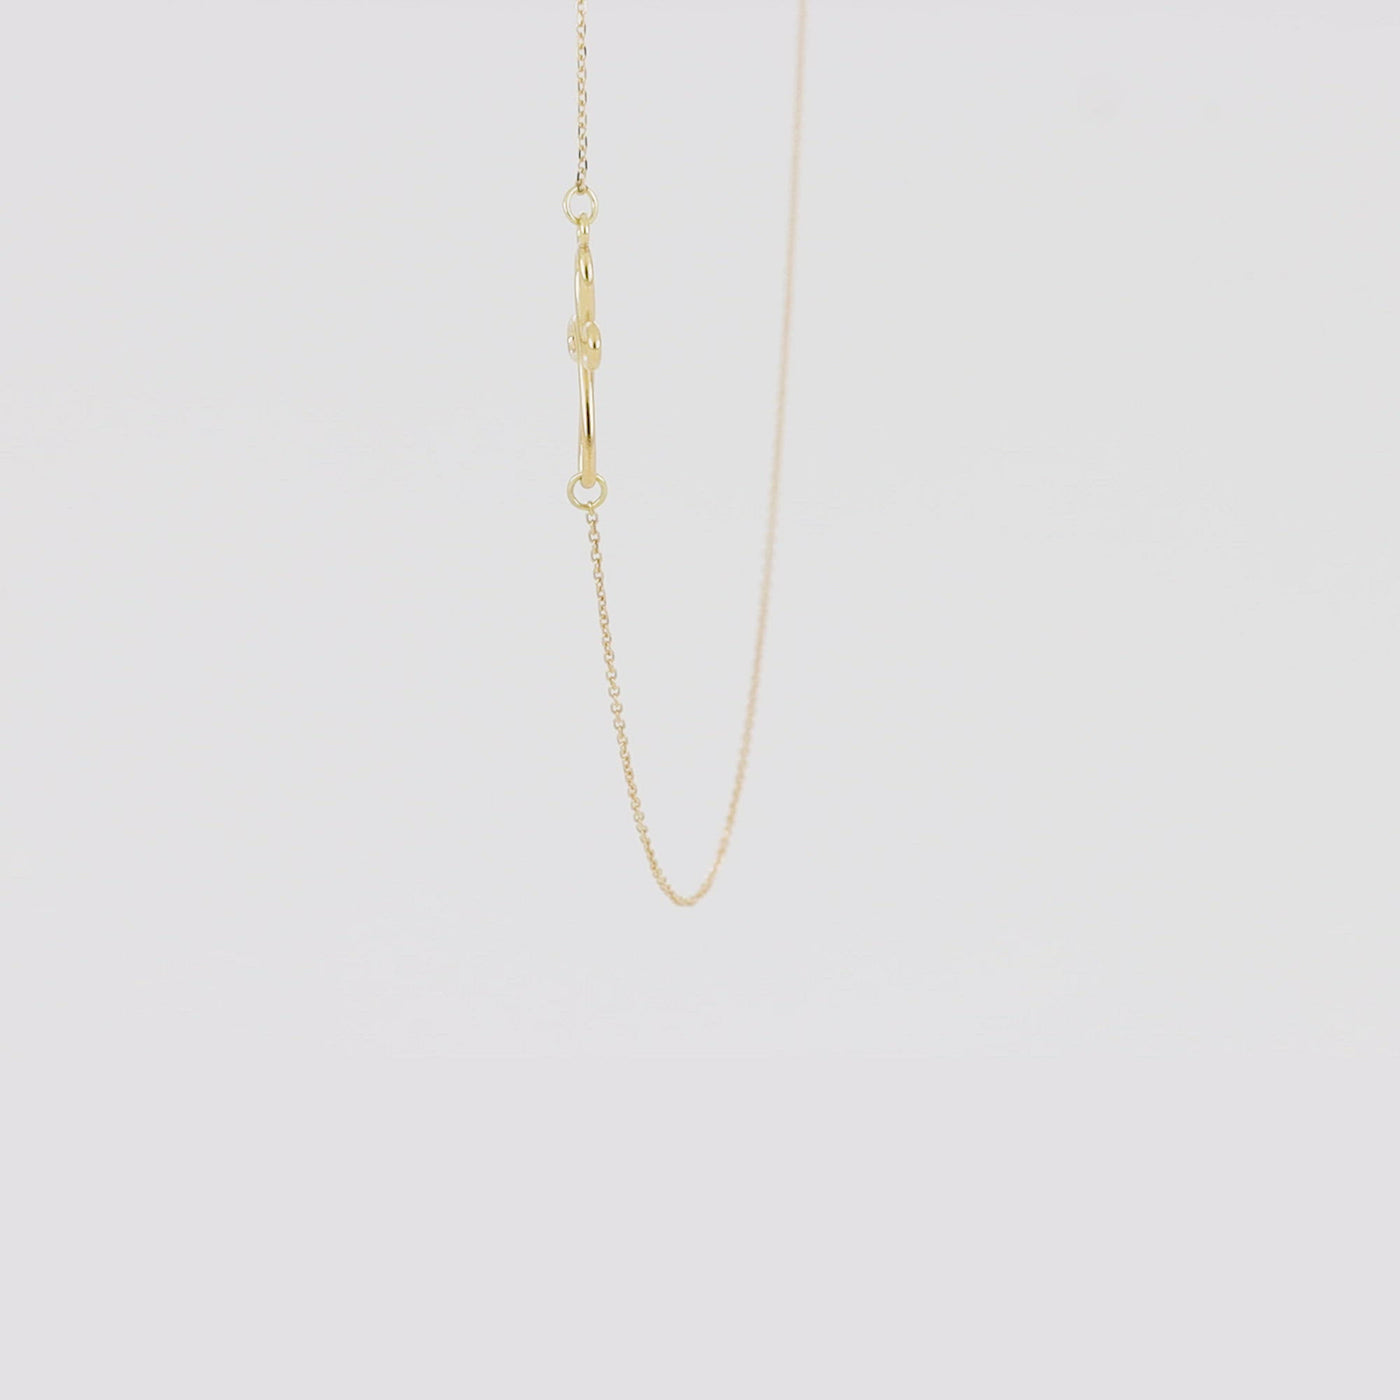 "The Naomi" Infinity Loop Necklace